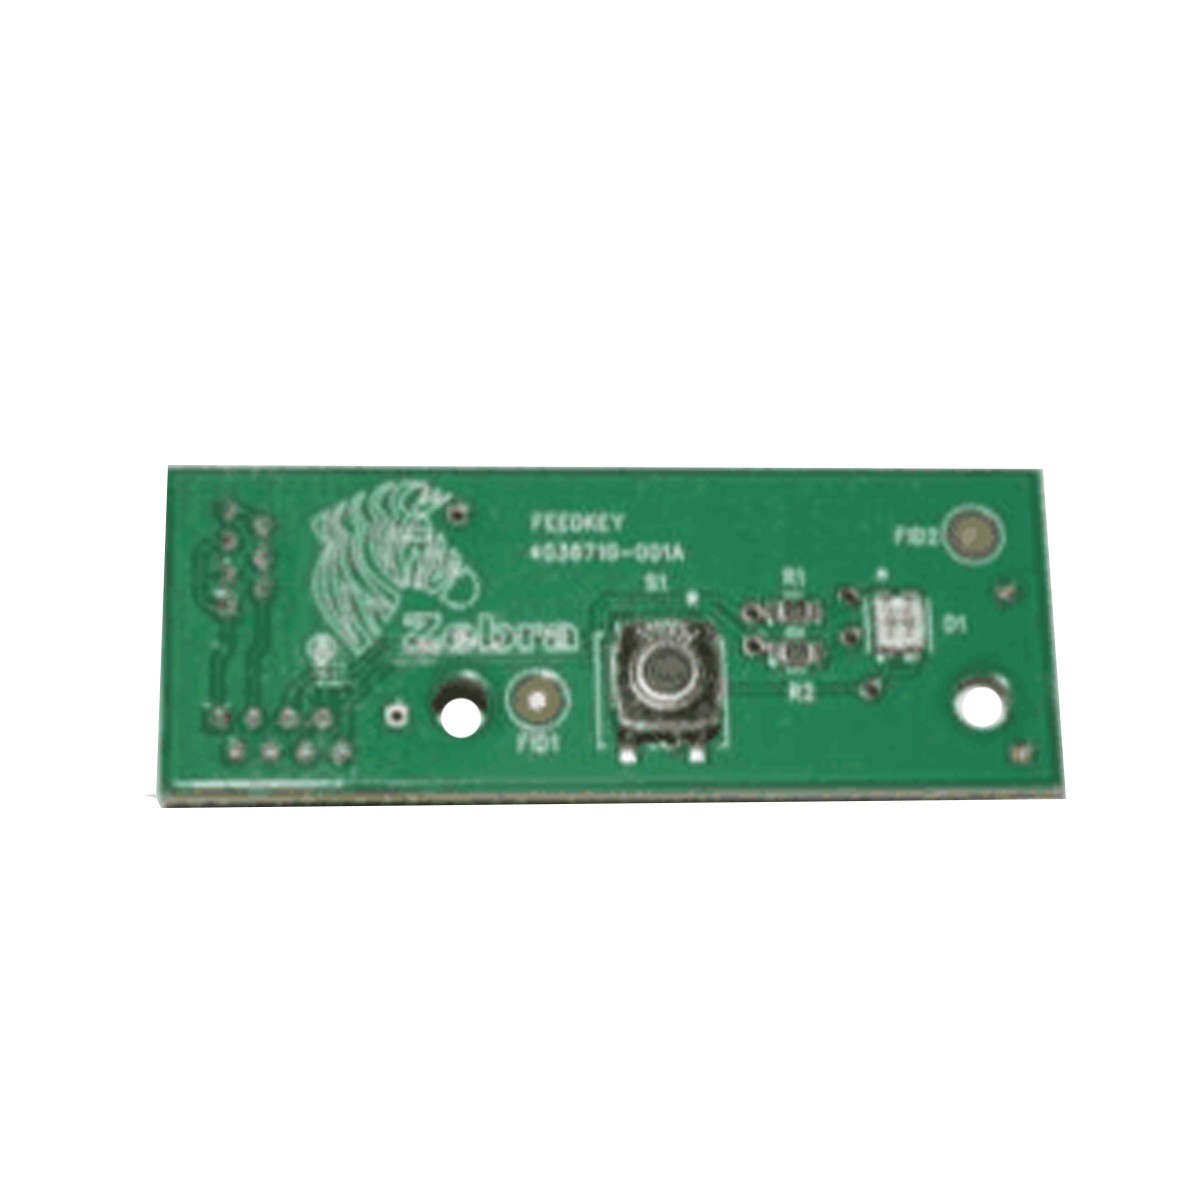 New Compatible button switch board For (ZB)Zebra 403671g-001a zp